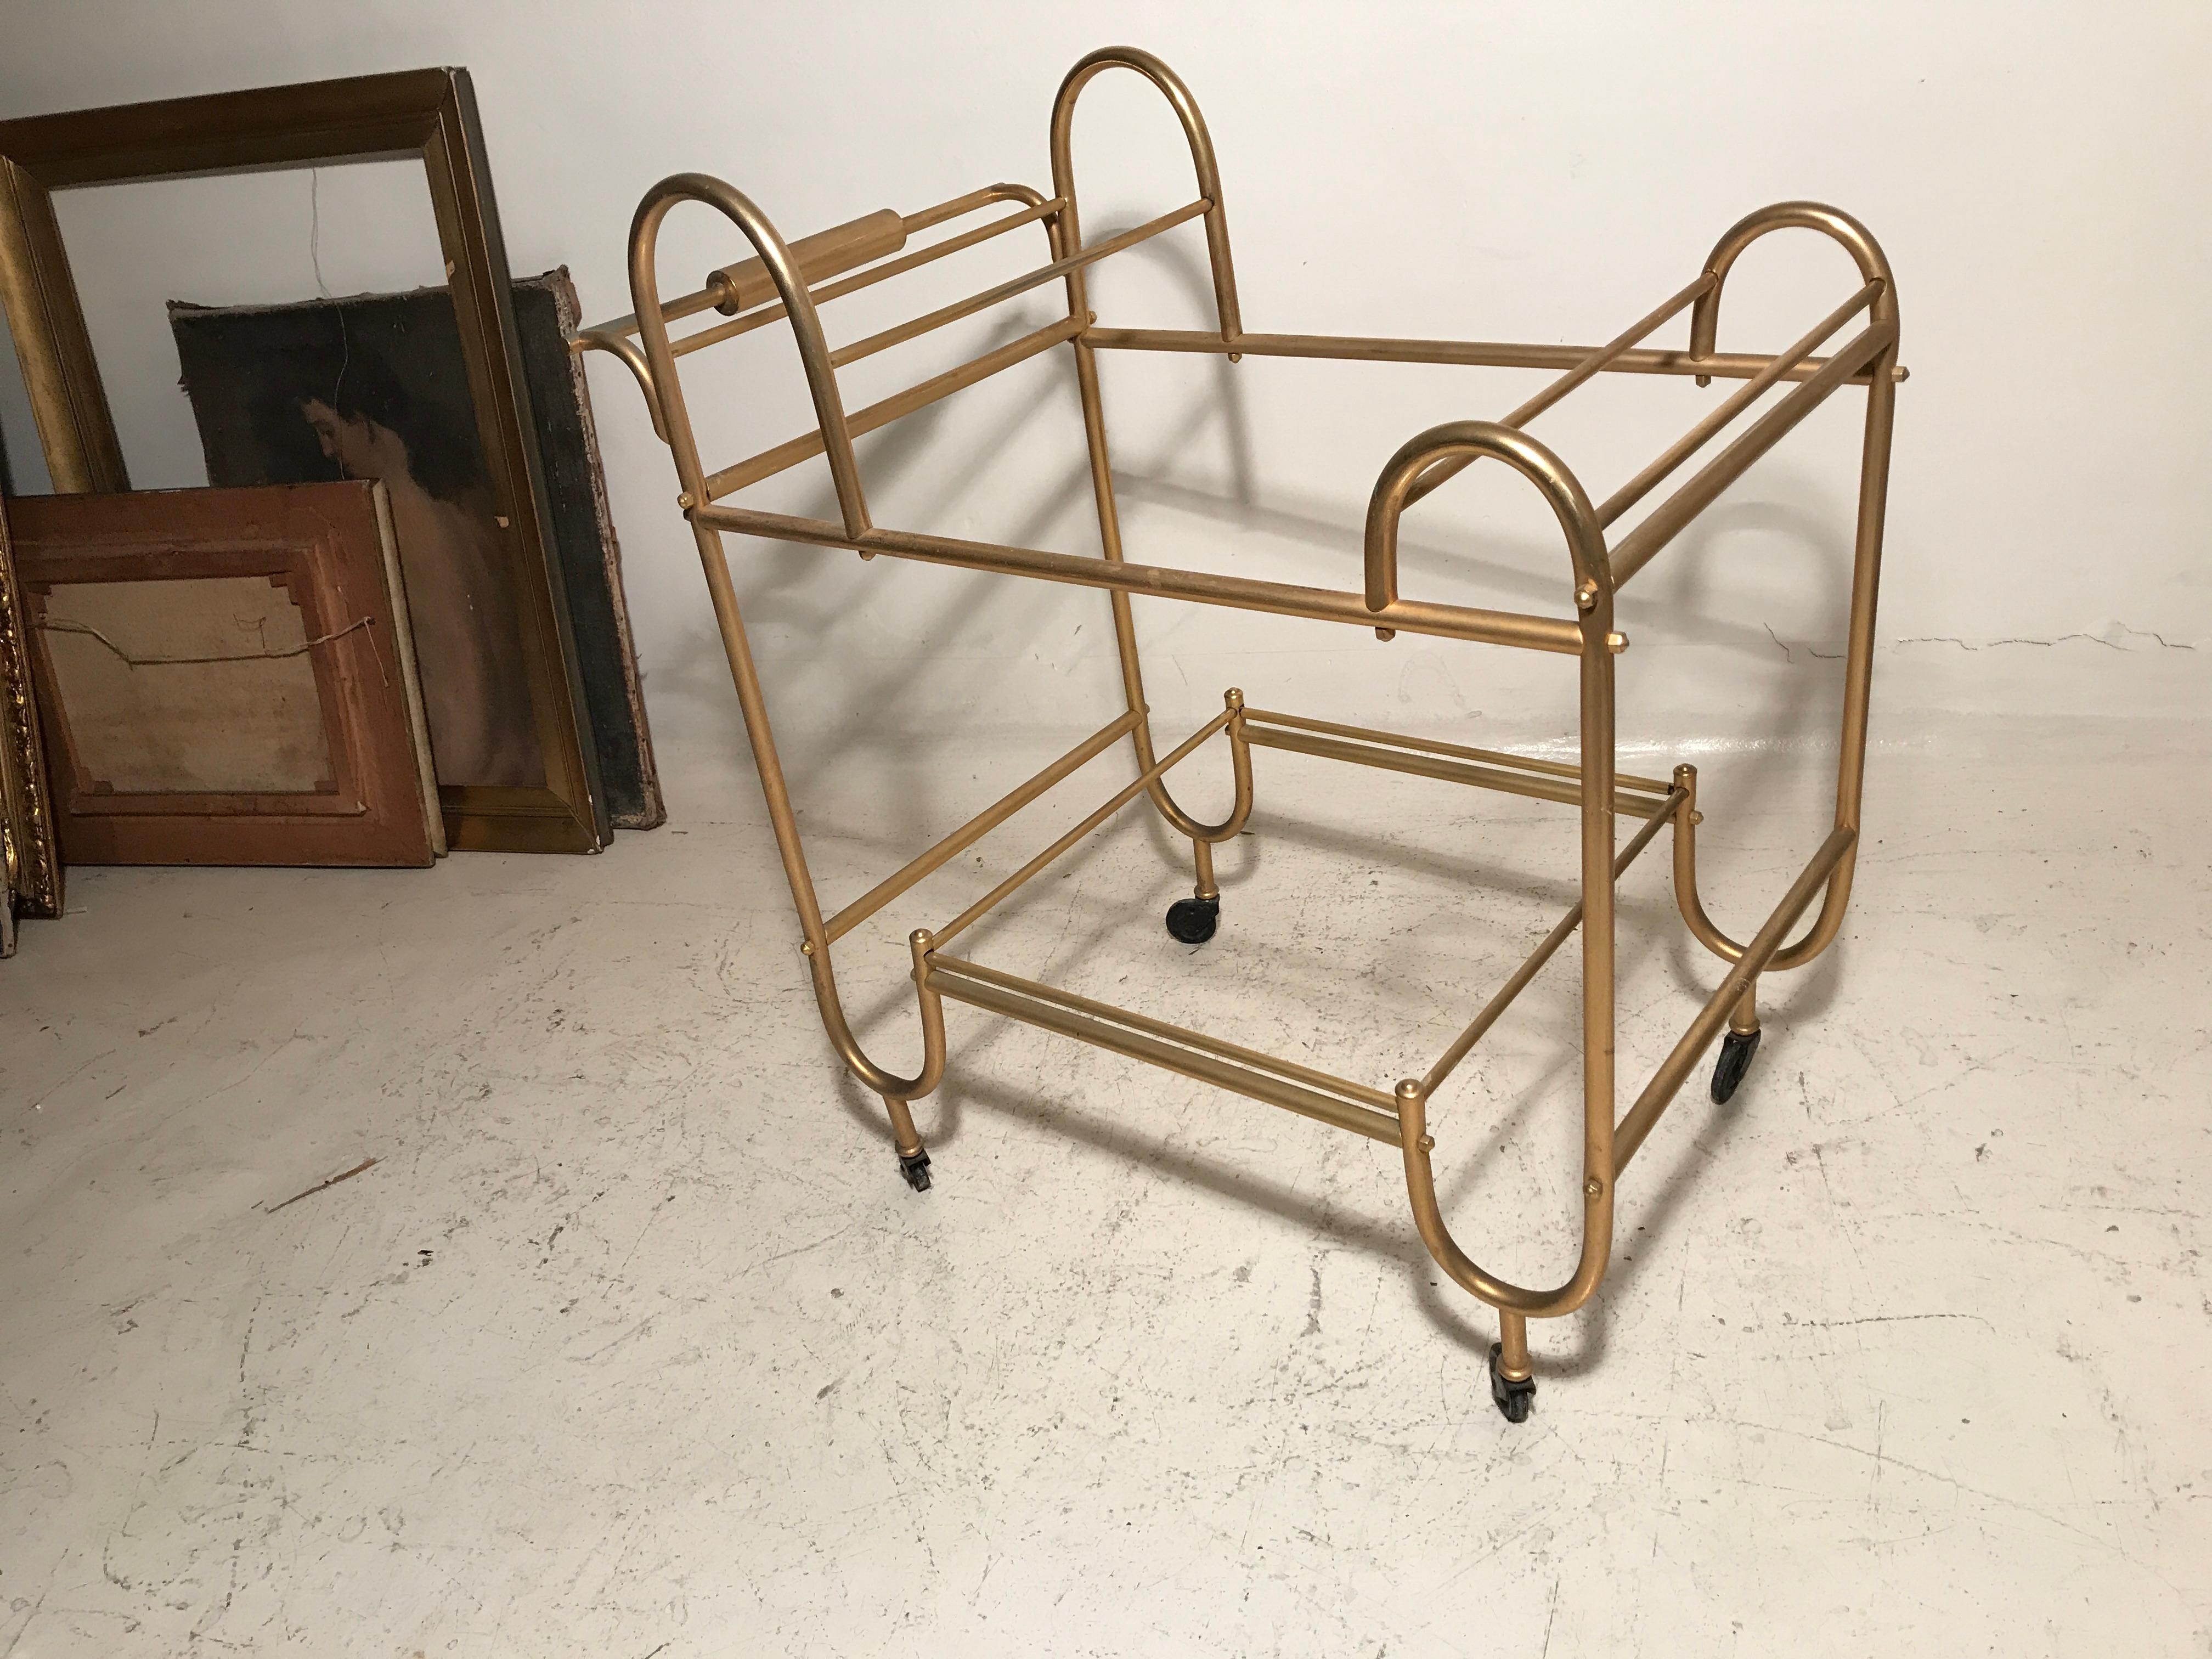 Amaizing Bar 

Materials: bronze and glass
Style: Art Deco.
If you want to live in the golden years, this is the bar that your project needs.
We have specialized in the sale of Art Deco and Art Nouveau styles since 1982.If you have any questions we